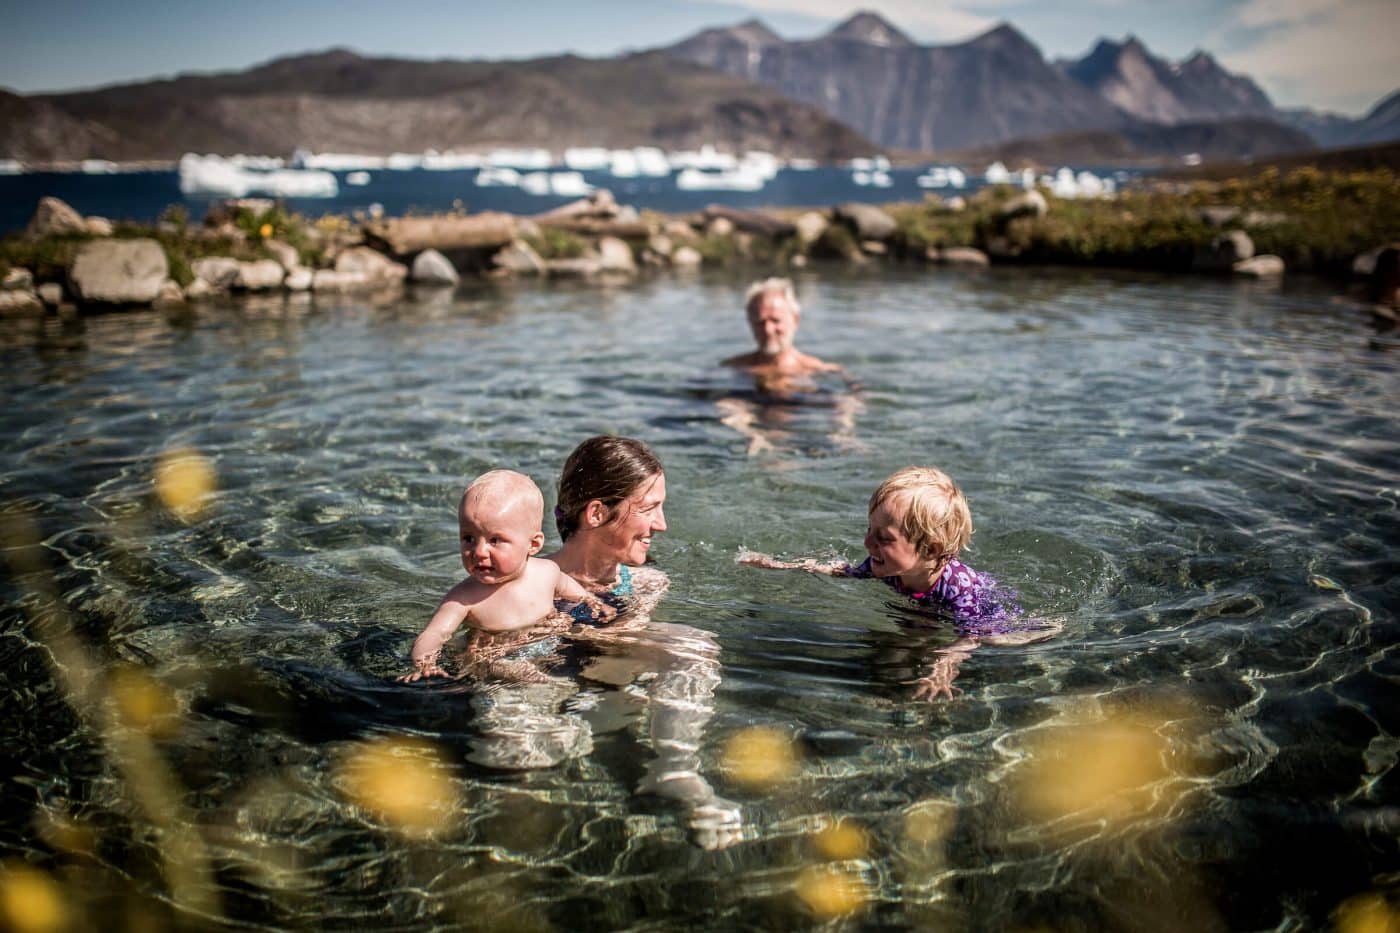 A family swimming in the Uunartoq hot springs in South Greenland, by Mads Pihl - Visit Greenland